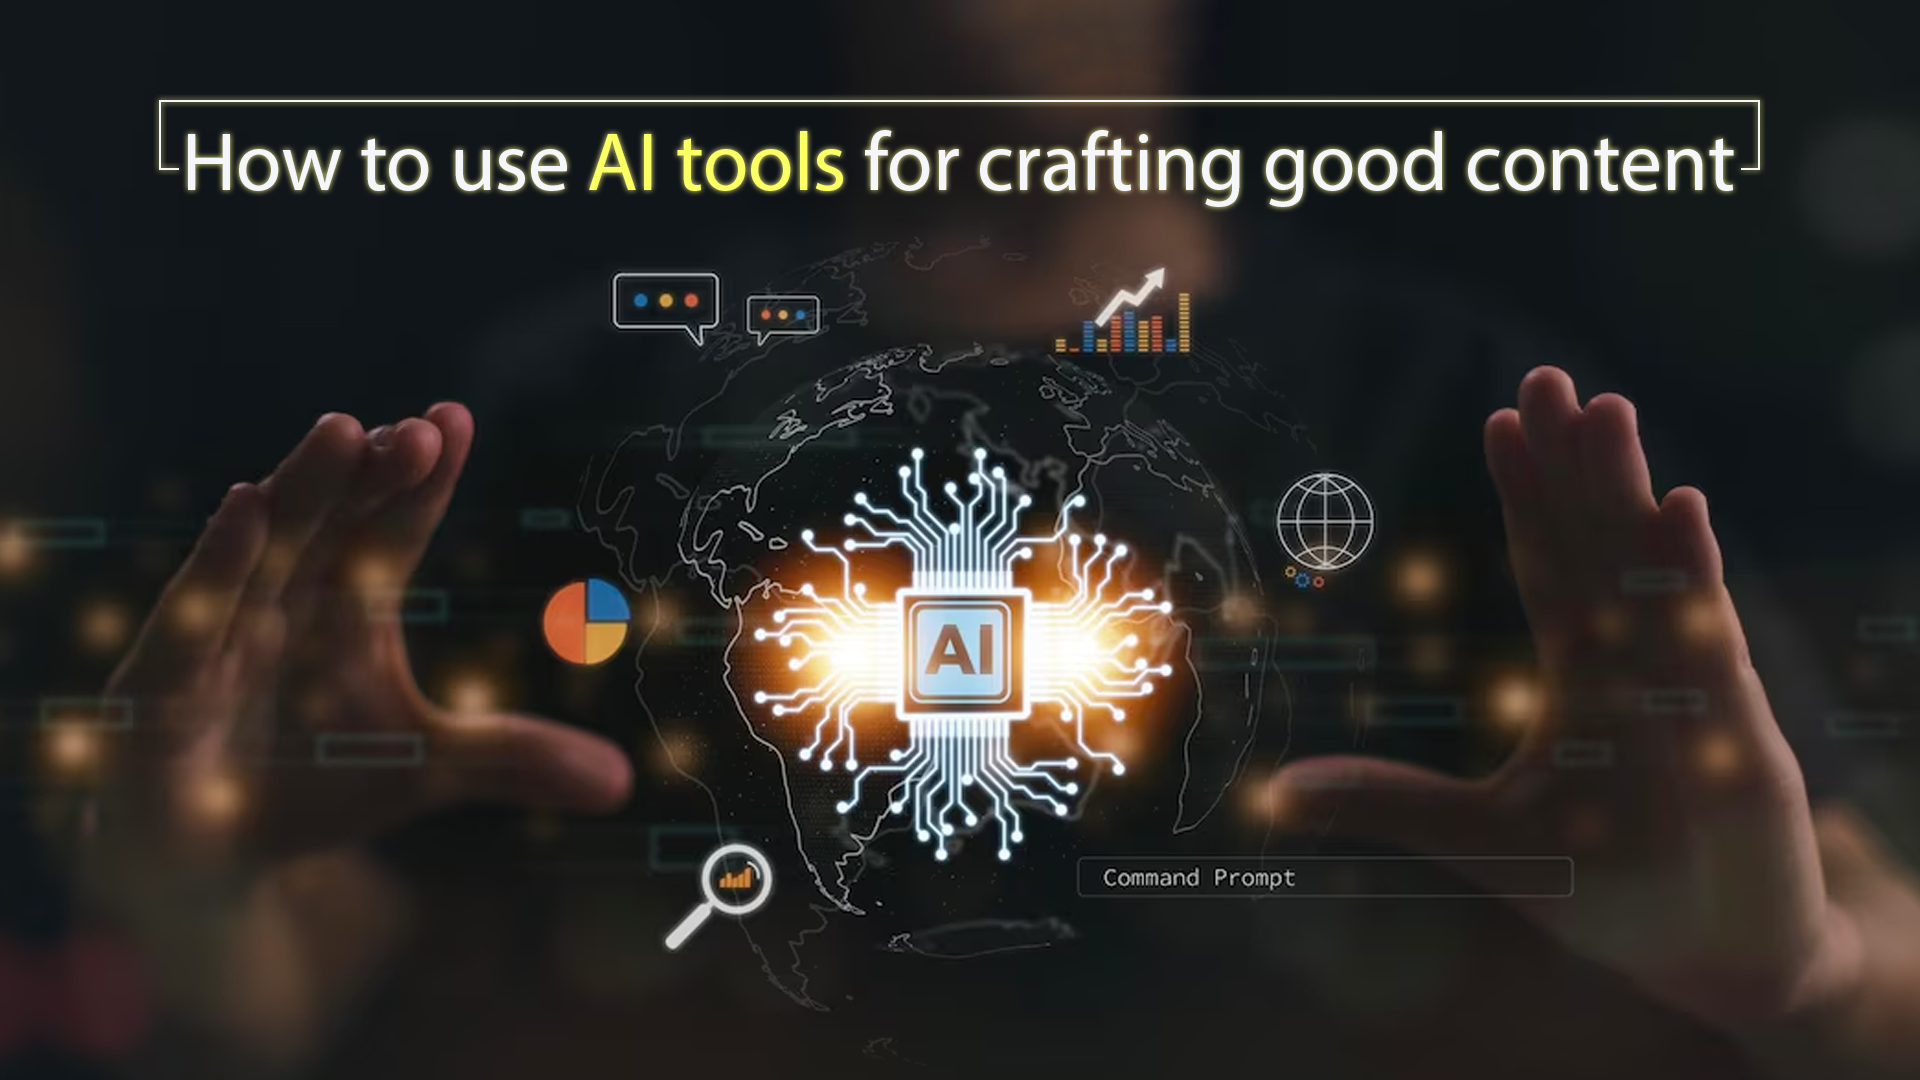 How to use AI tools for crafting good content